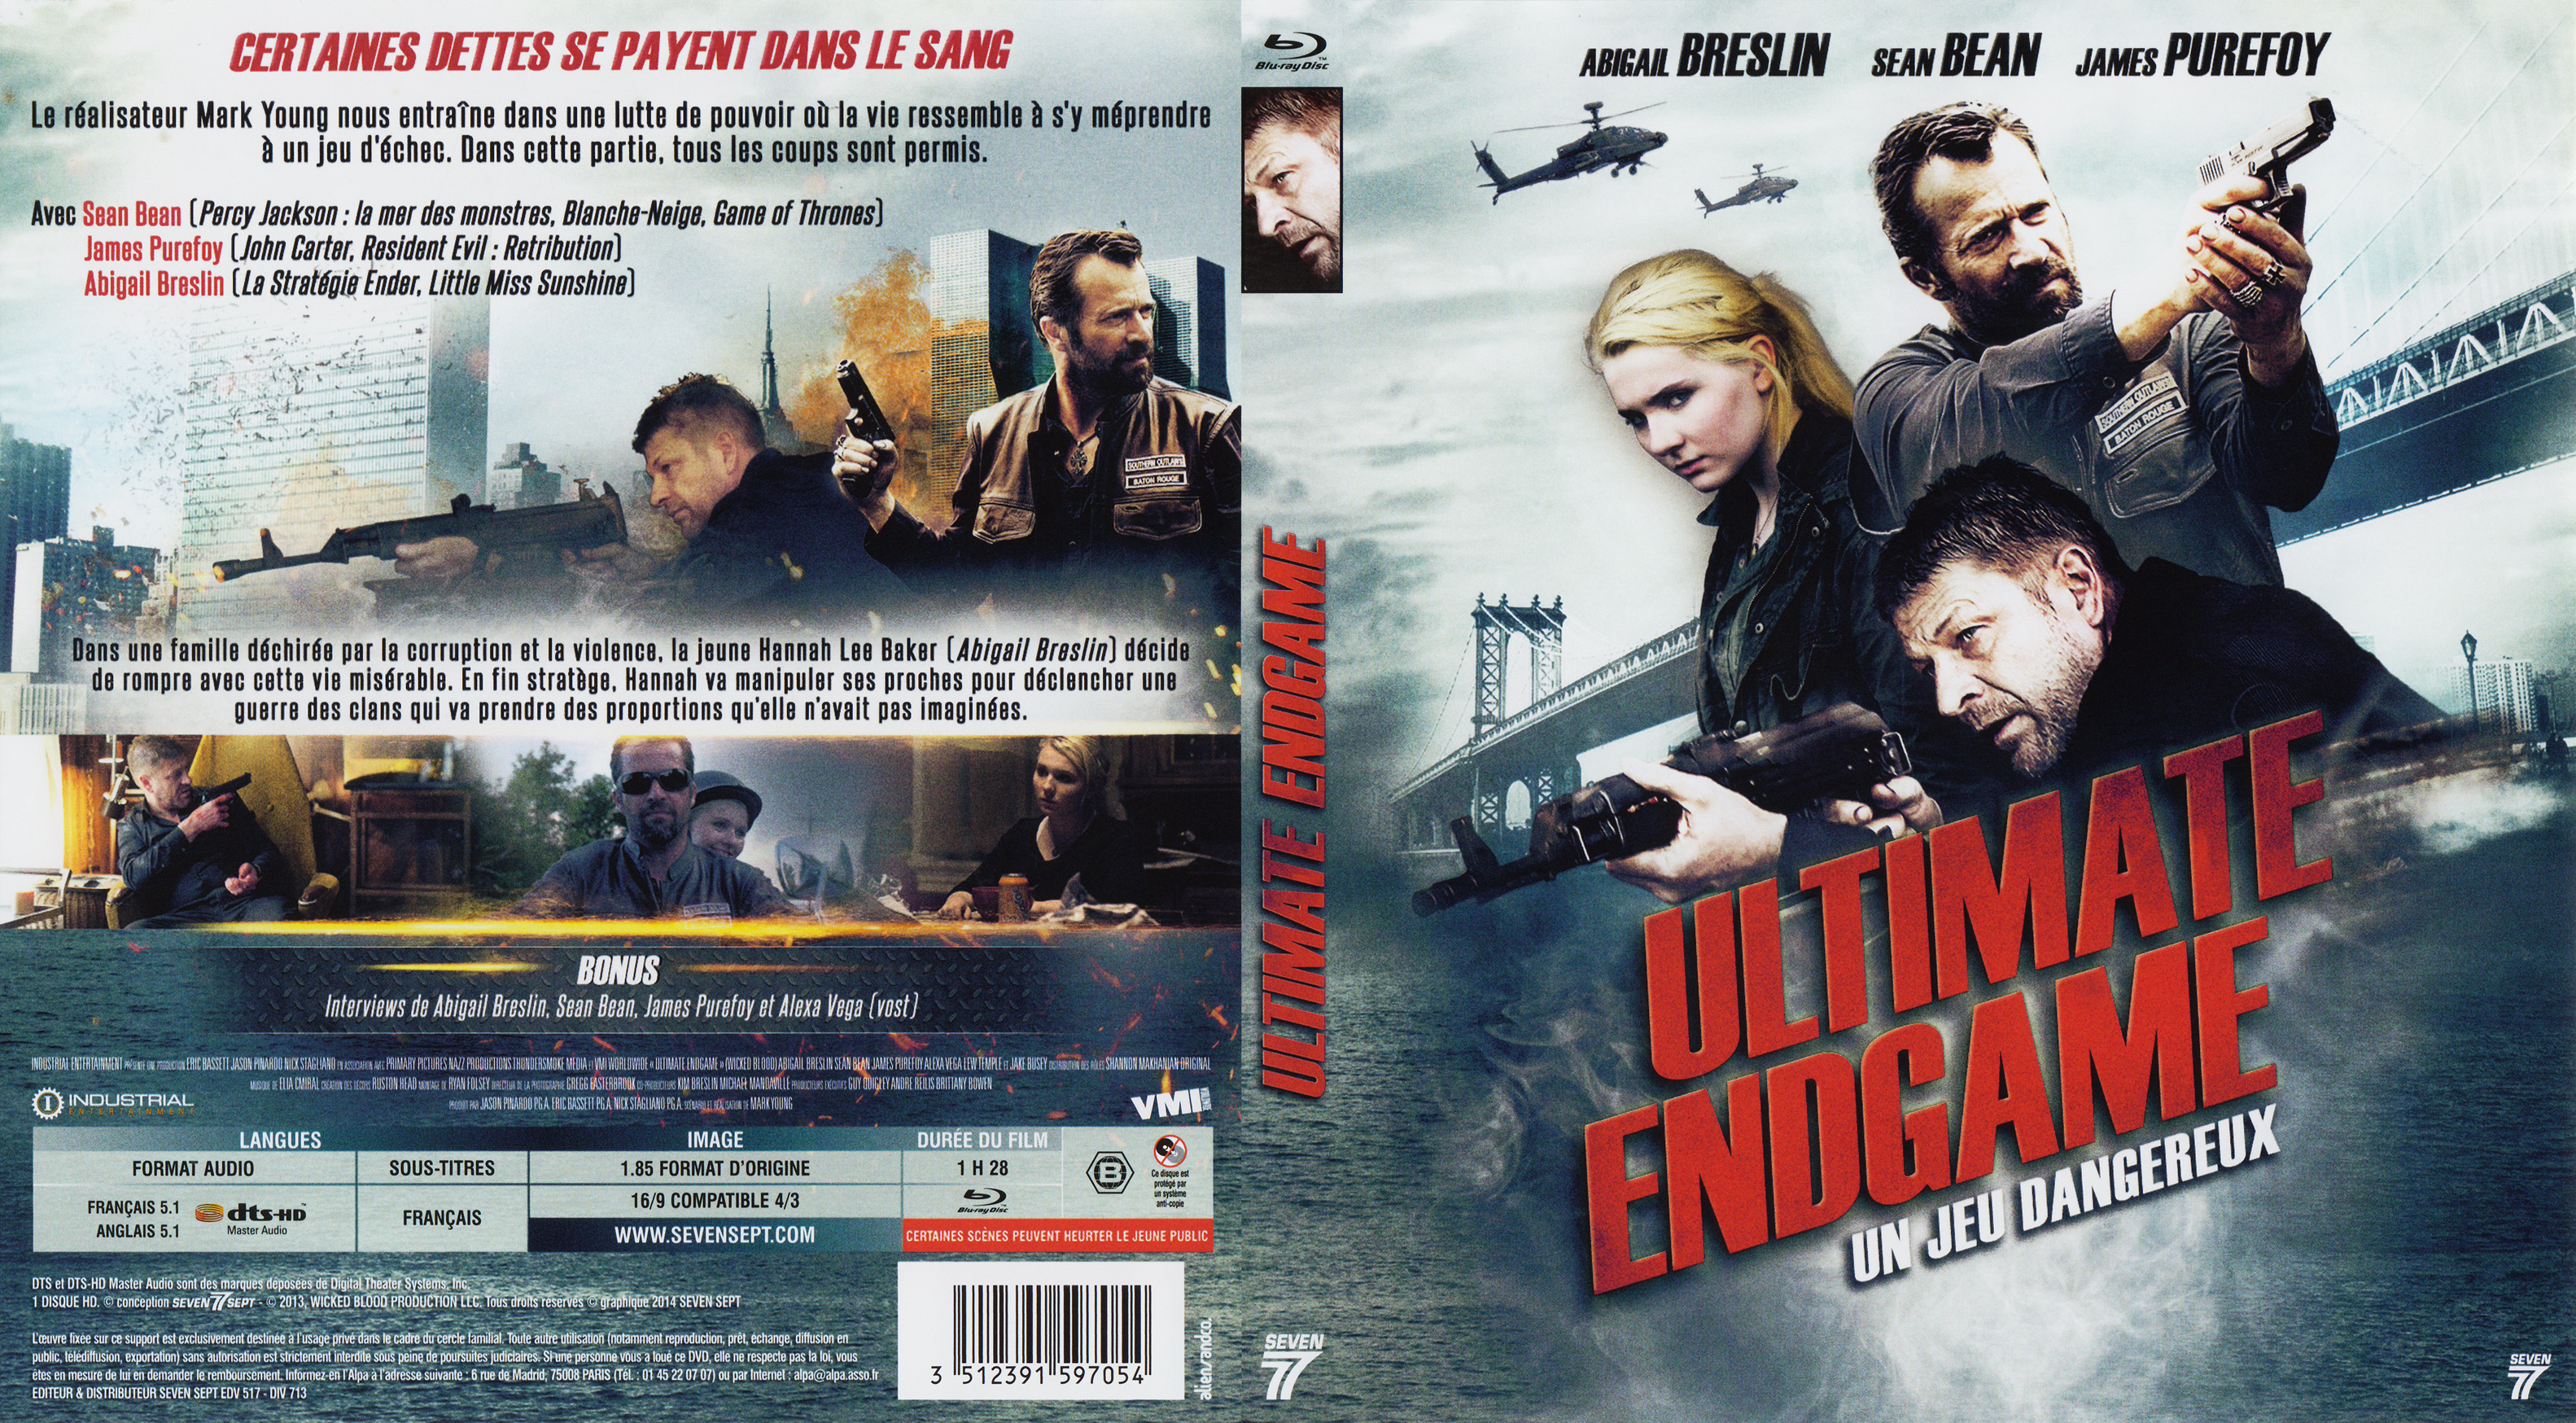 Jaquette DVD Ultimate endgame (BLU-RAY)